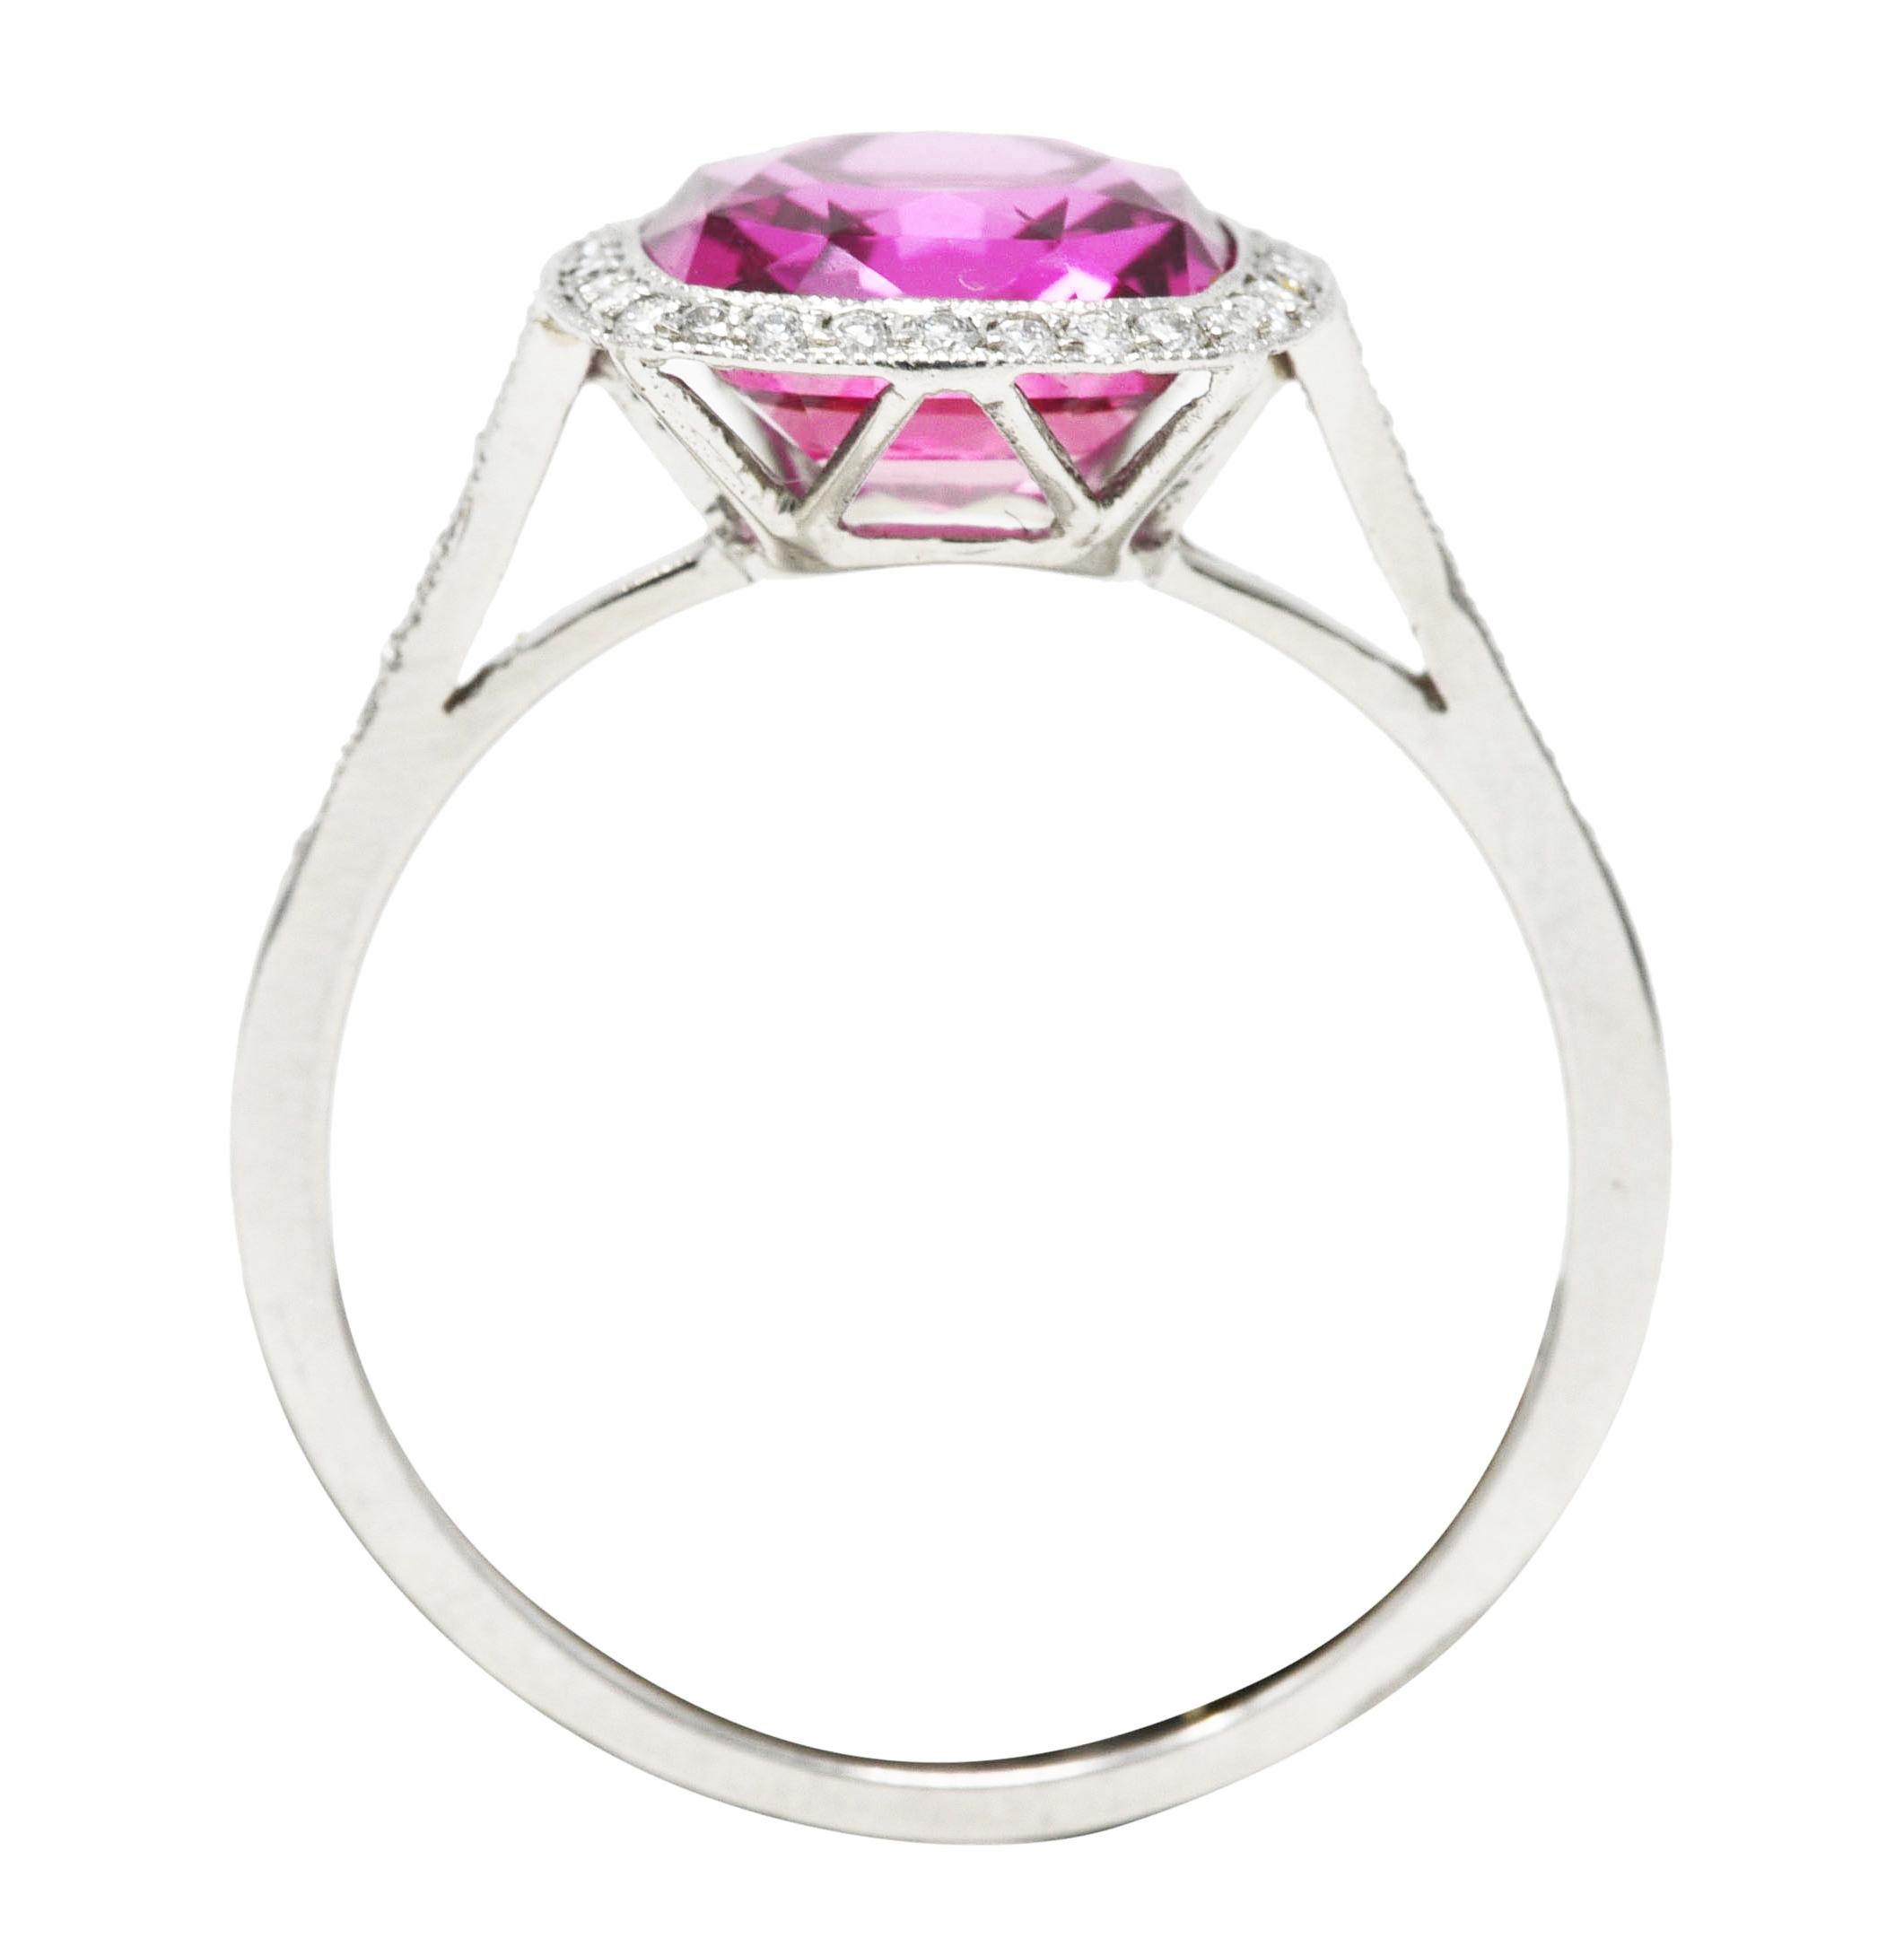 Featuring a mixed cushion cut Madagascar pink sapphire weighing approximately 3.30 carats. Transparent and saturated pink in color - medium dark in tone. Surrounded by a round brilliant cut diamond halo and diamond accented cathedral shoulders.